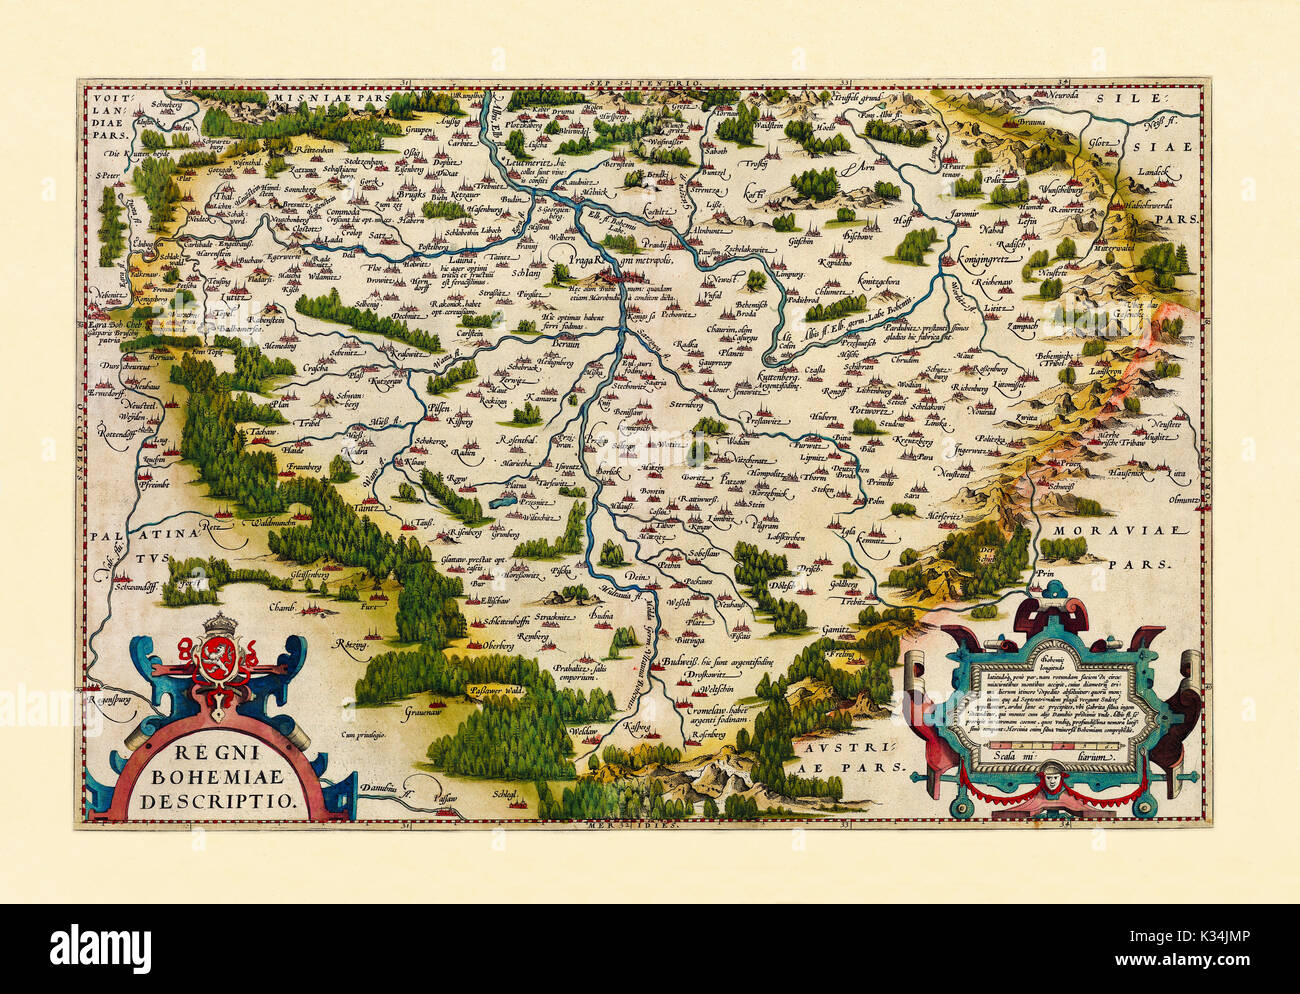 Old map of Bohemia. Excellent state of preservation realized in ancient style. All the graphic composition is inside a frame. By Ortelius, Theatrum Orbis Terrarum, Antwerp, 1570 Stock Photo